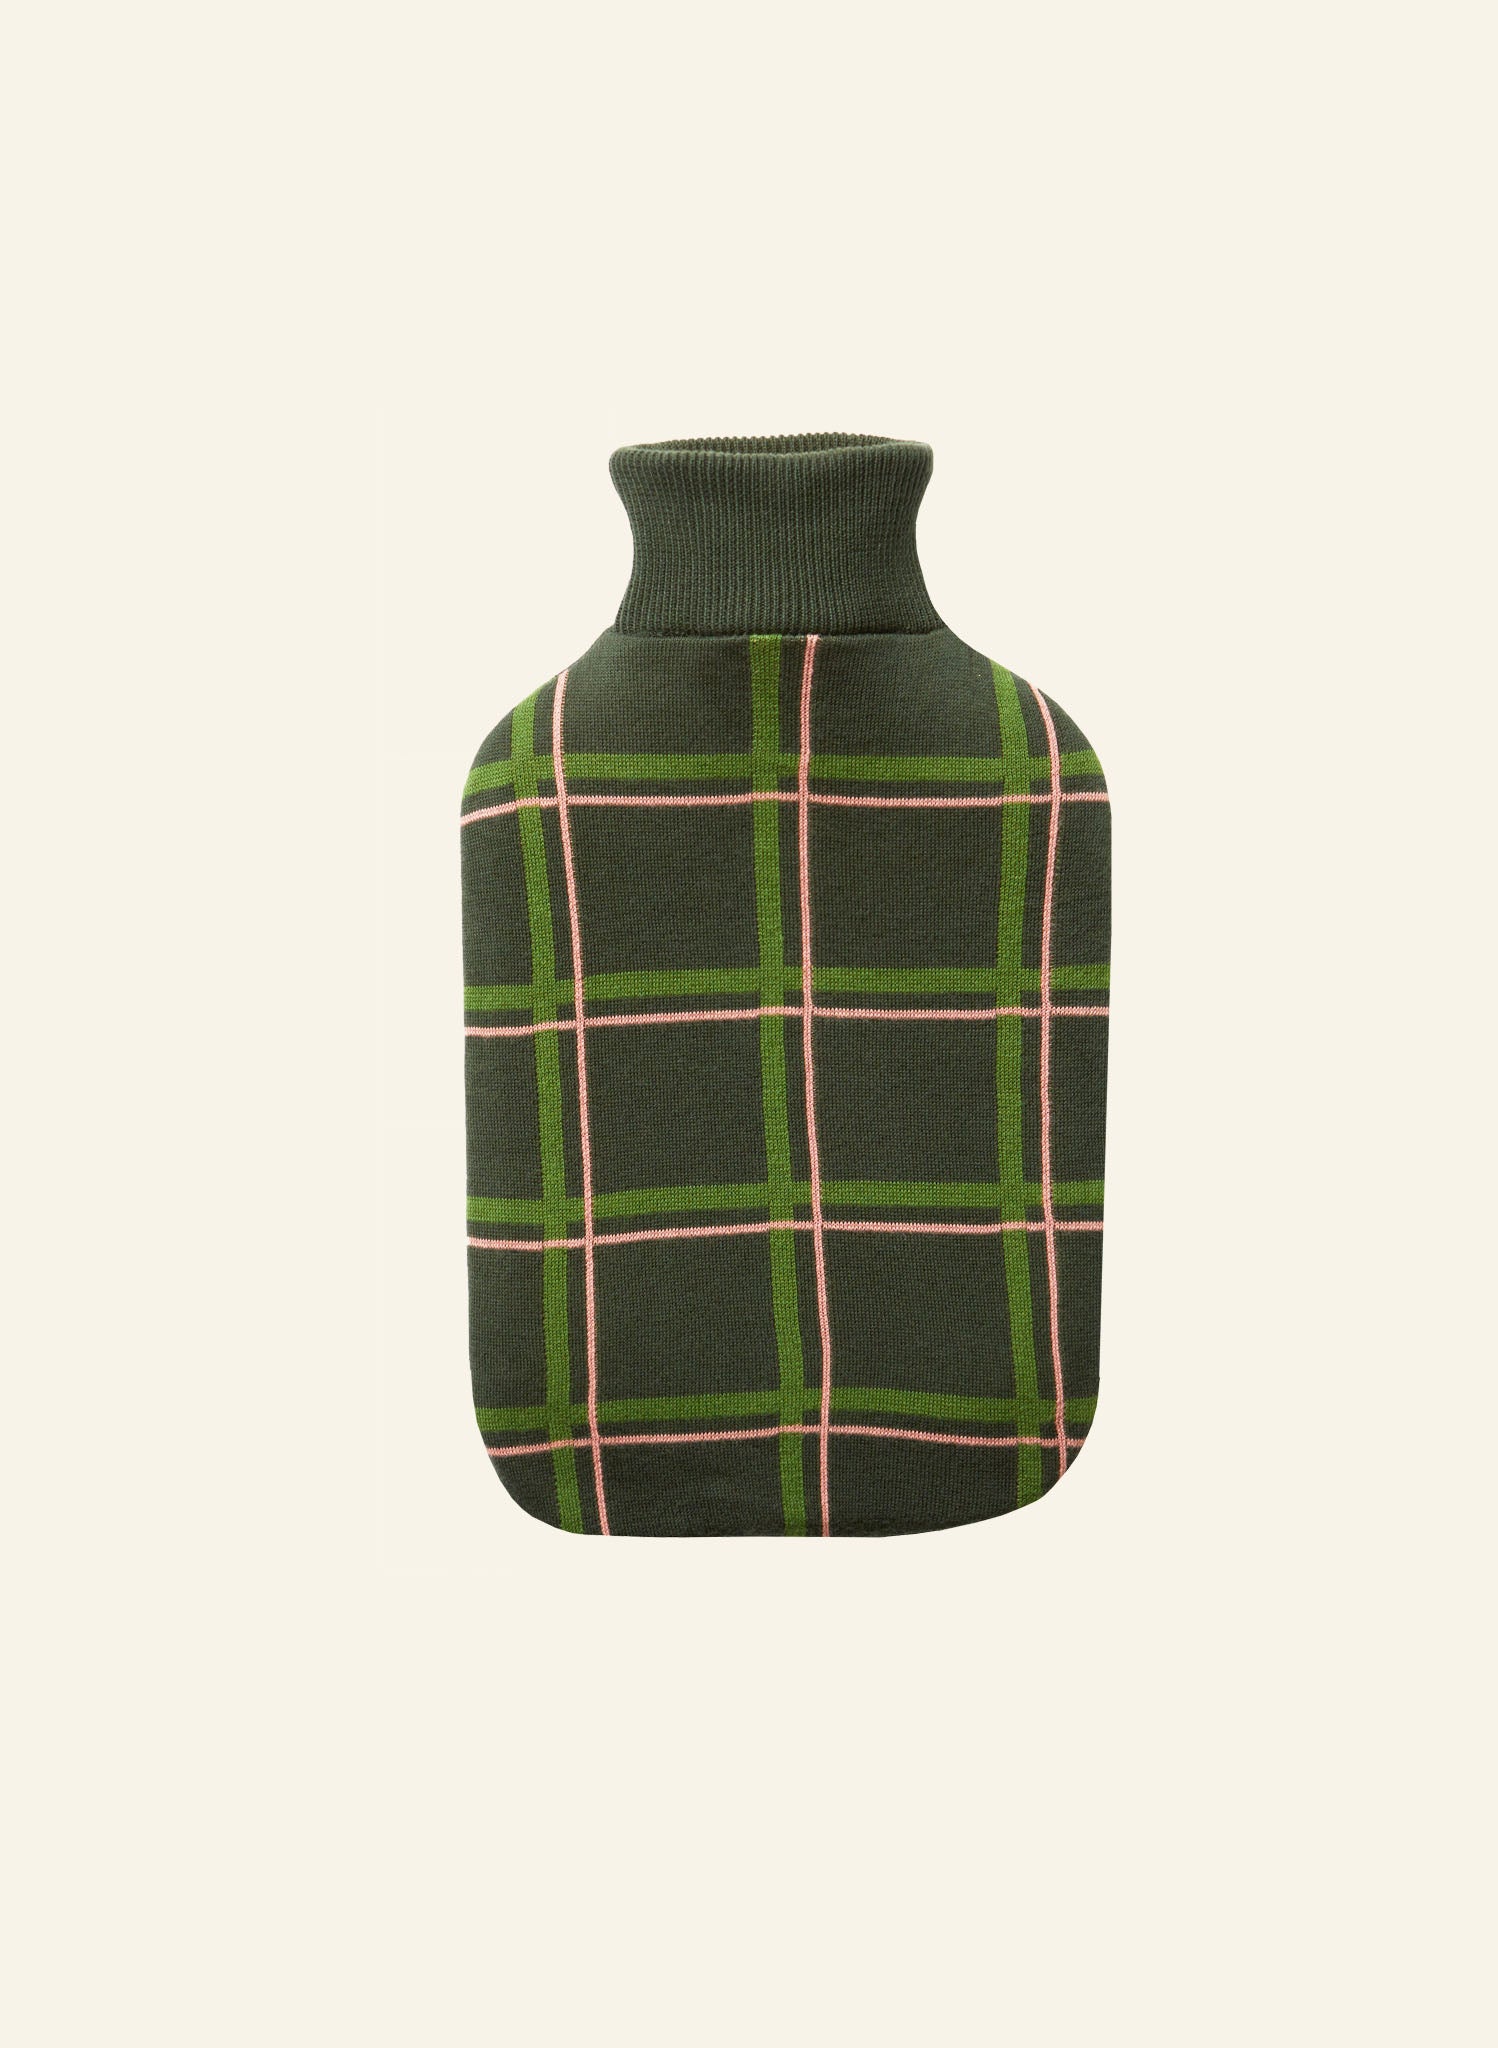 Hot Water Bottle Cover - Green Tuck Shop